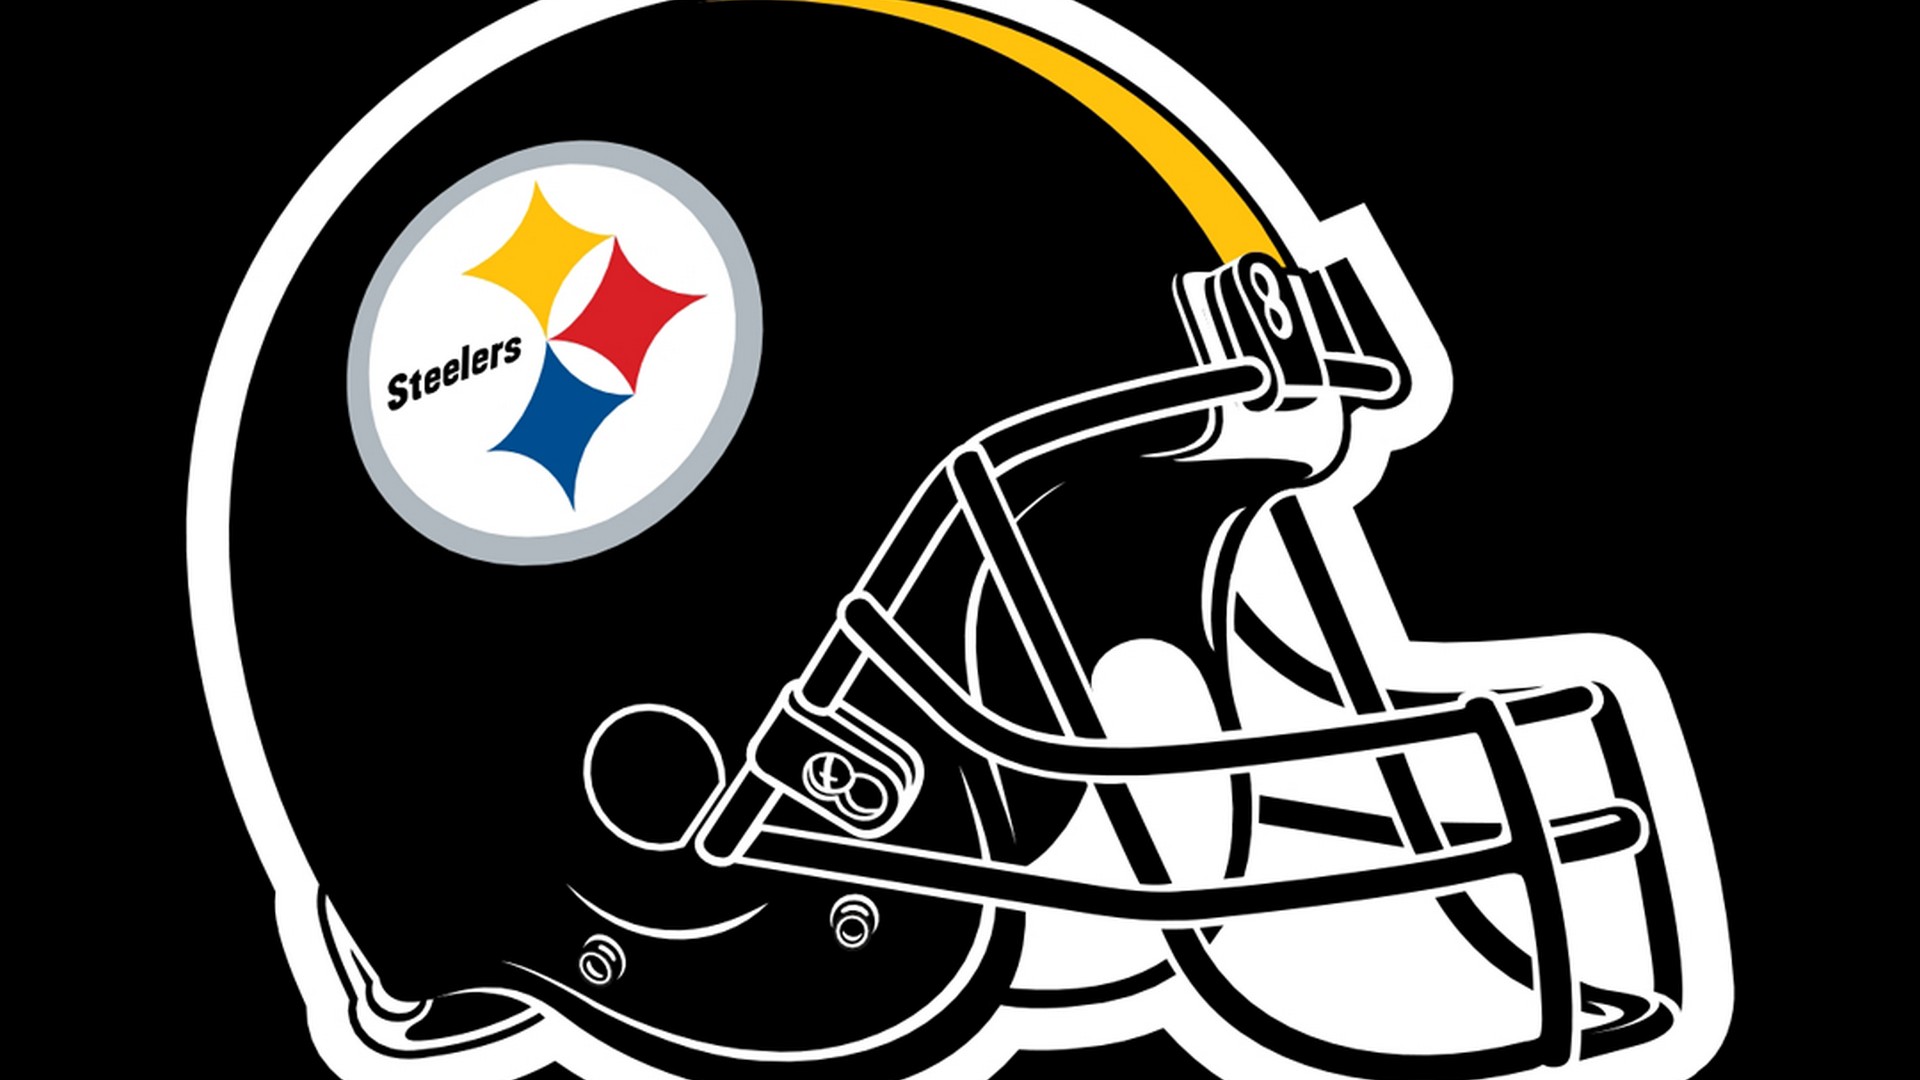 Steelers Wallpaper with resolution 1920x1080 pixel. You can make this wallpaper for your Mac or Windows Desktop Background, iPhone, Android or Tablet and another Smartphone device